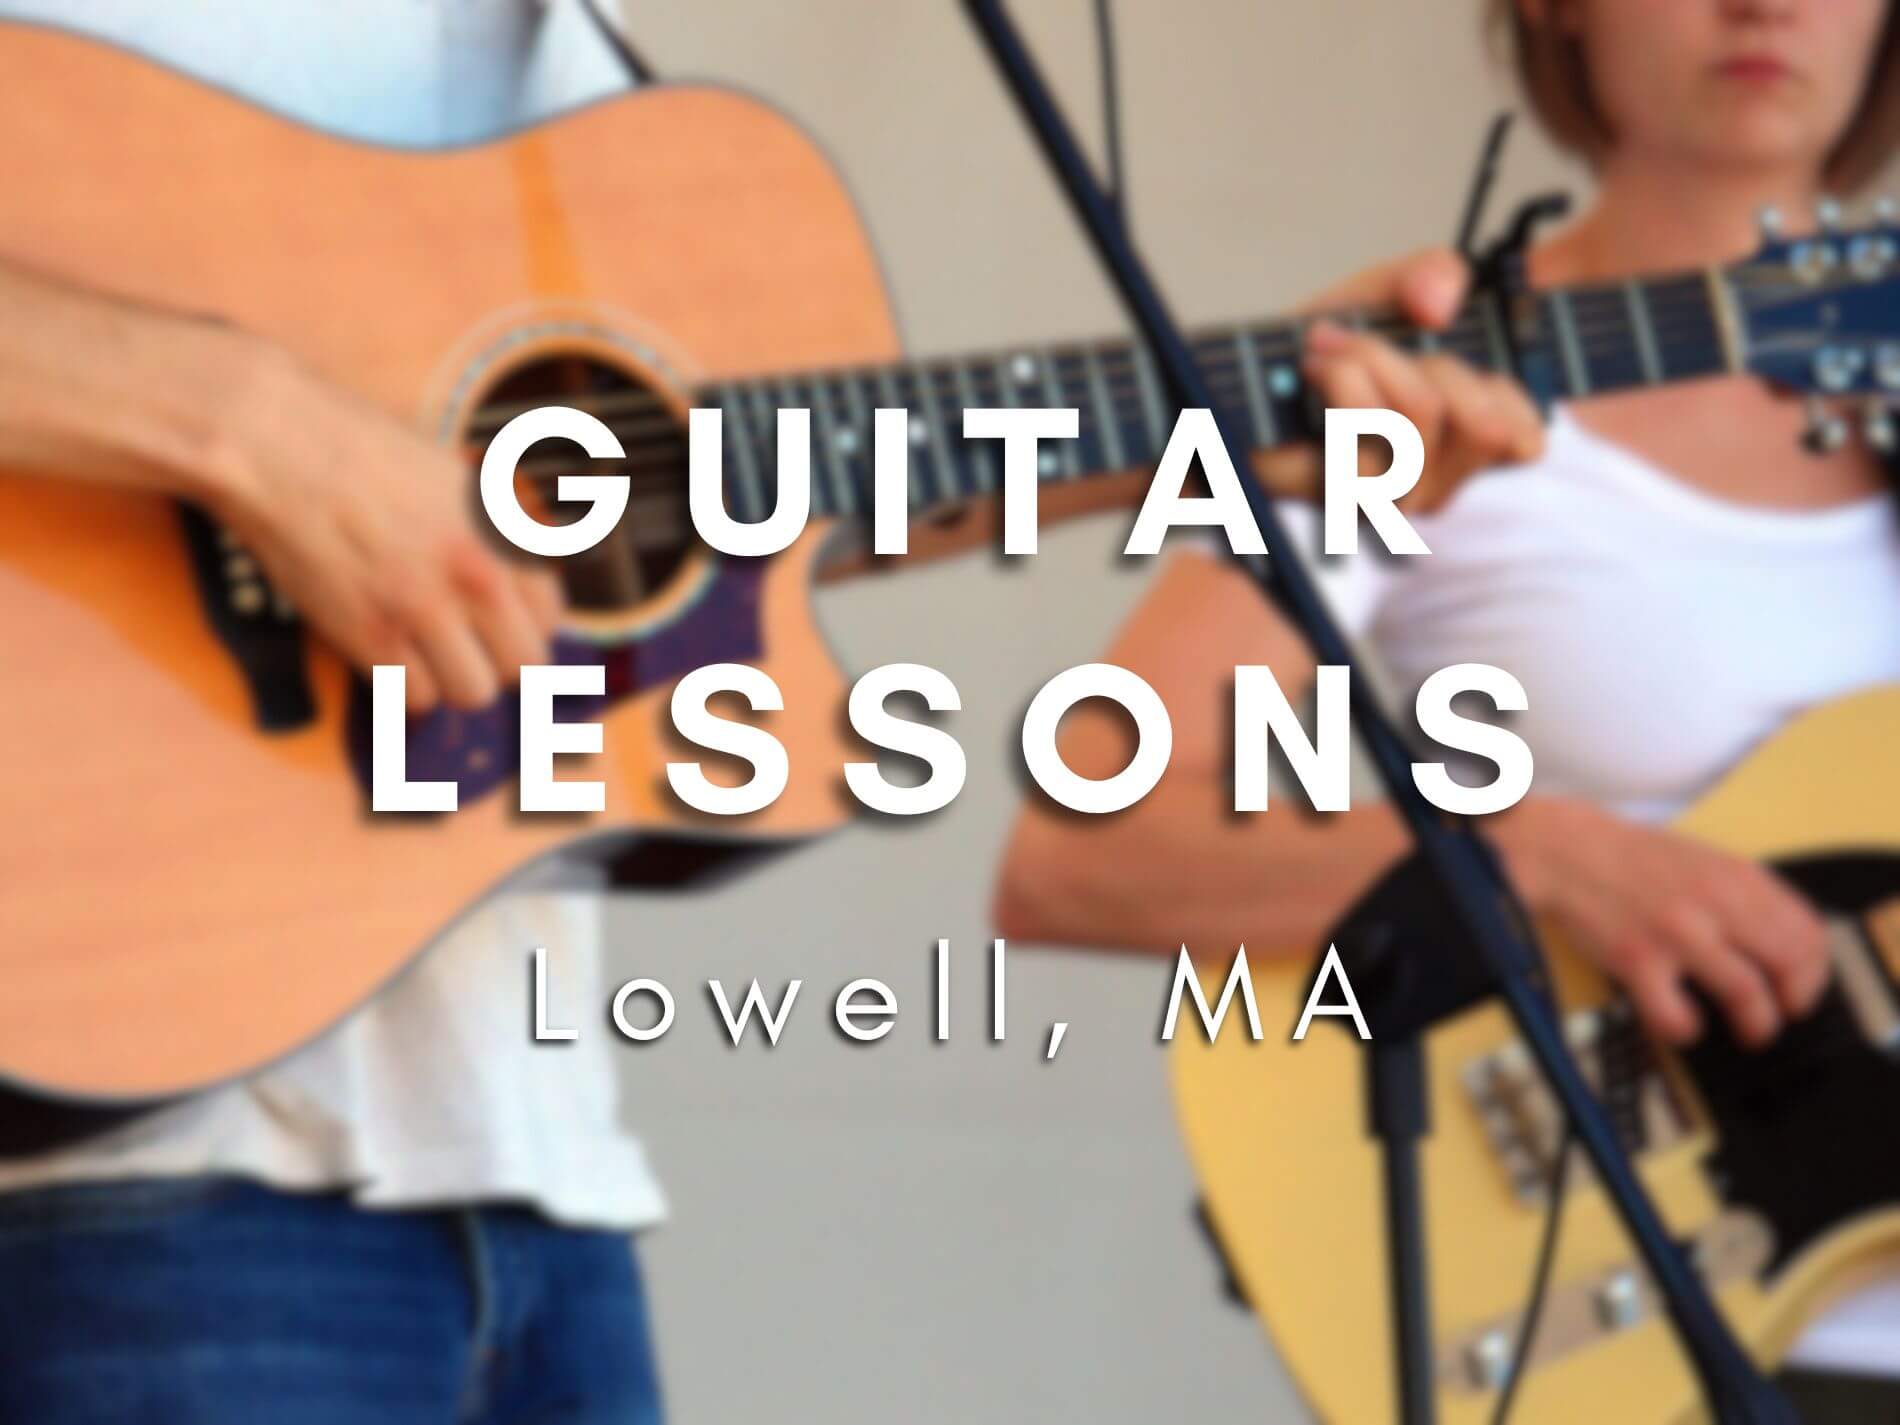 Guitar Lessons in Lowell, Massachusetts: Learn to Play Guitar with Expert Instruction